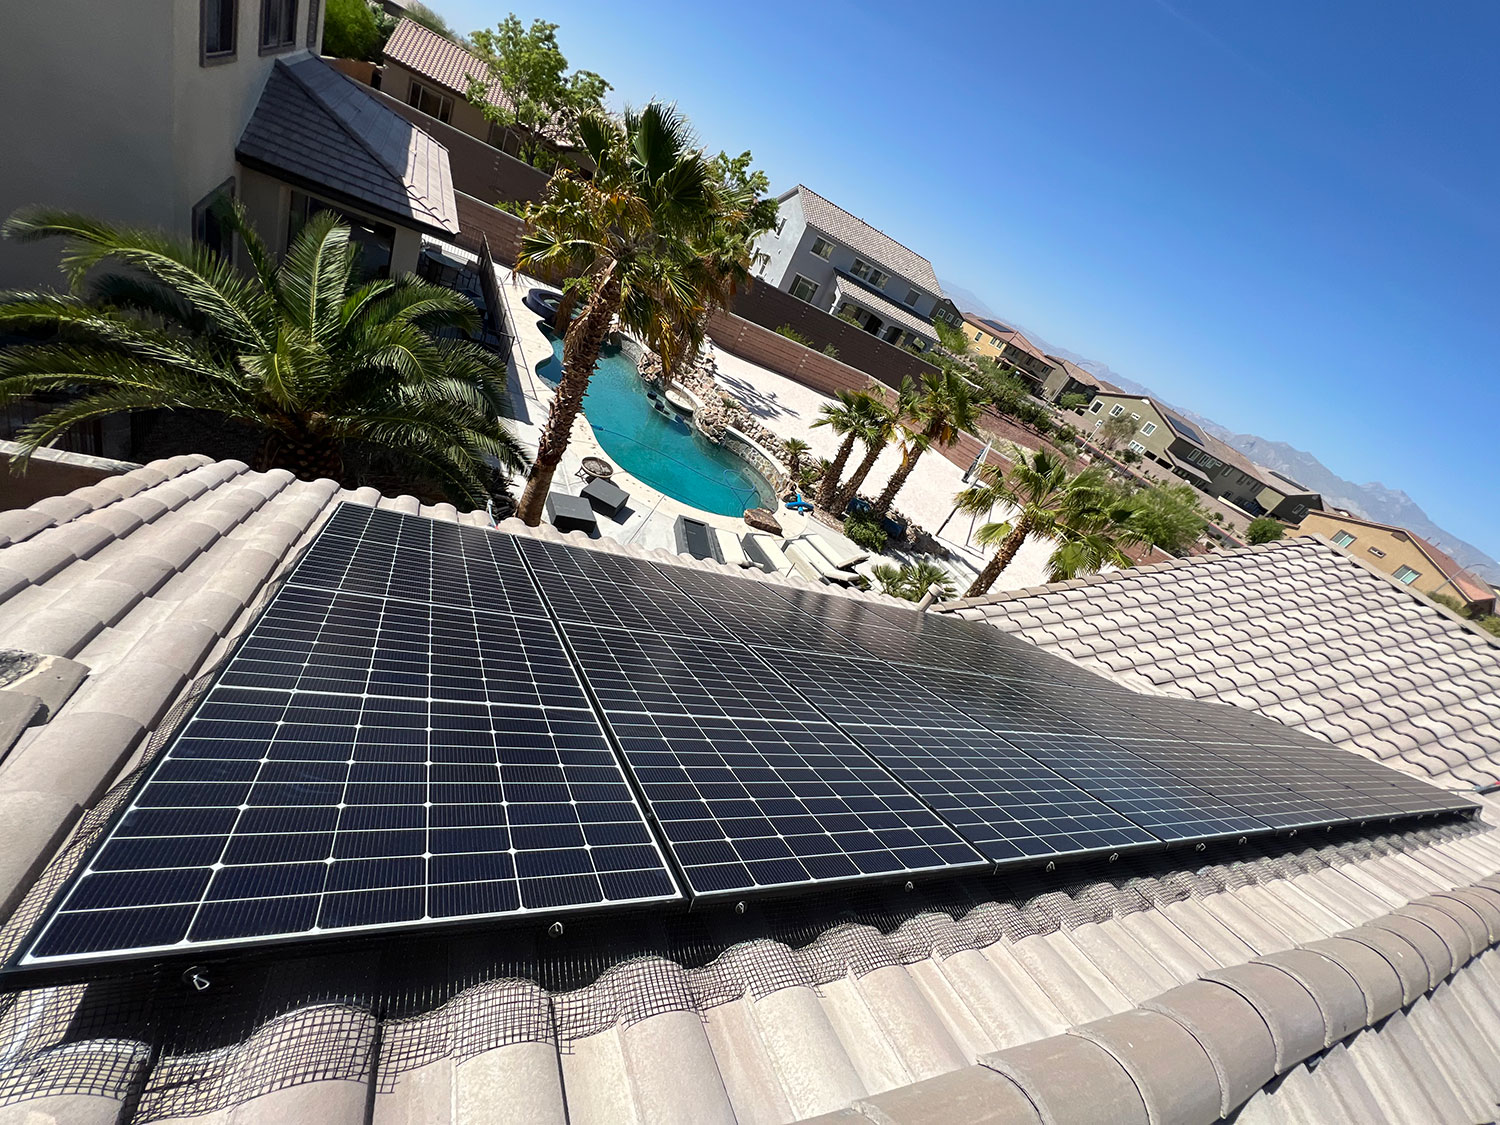 Sol-Up, solar services, Green Valley Ranch, Southern Nevada, climate, weather, sunlight, energy efficiency, sustainable living, renewable energy, solar panels, savings, expert team, tailored solutions